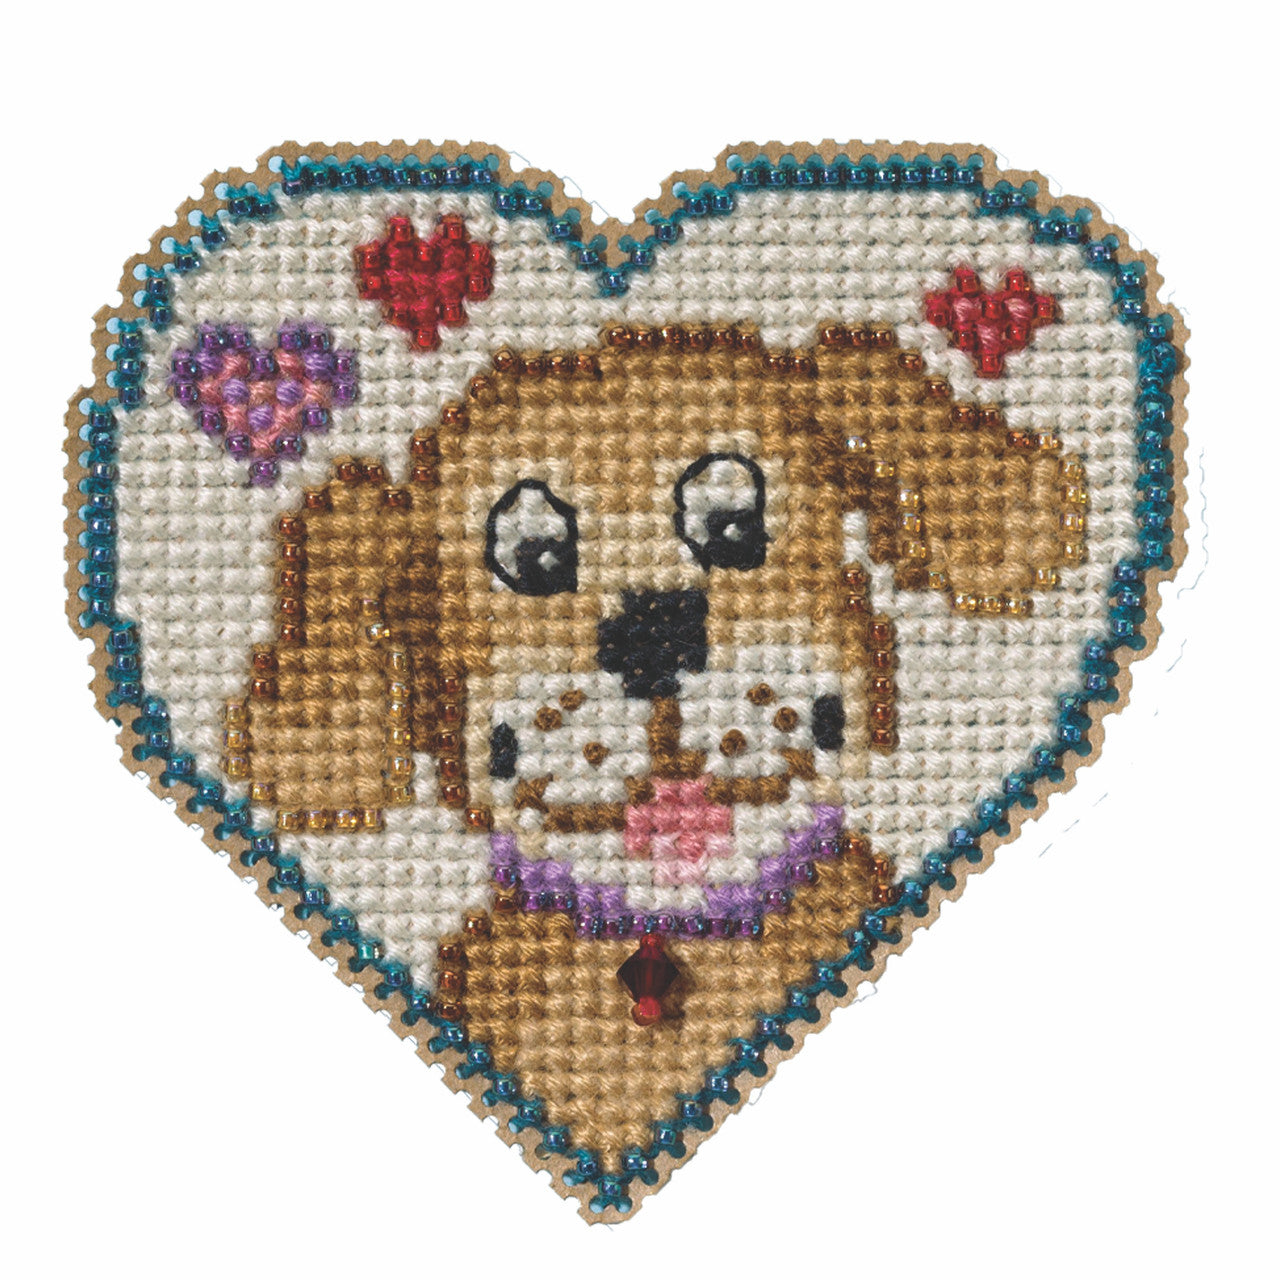 Spring Bouquet - Puppy Love counted cross stitch kit